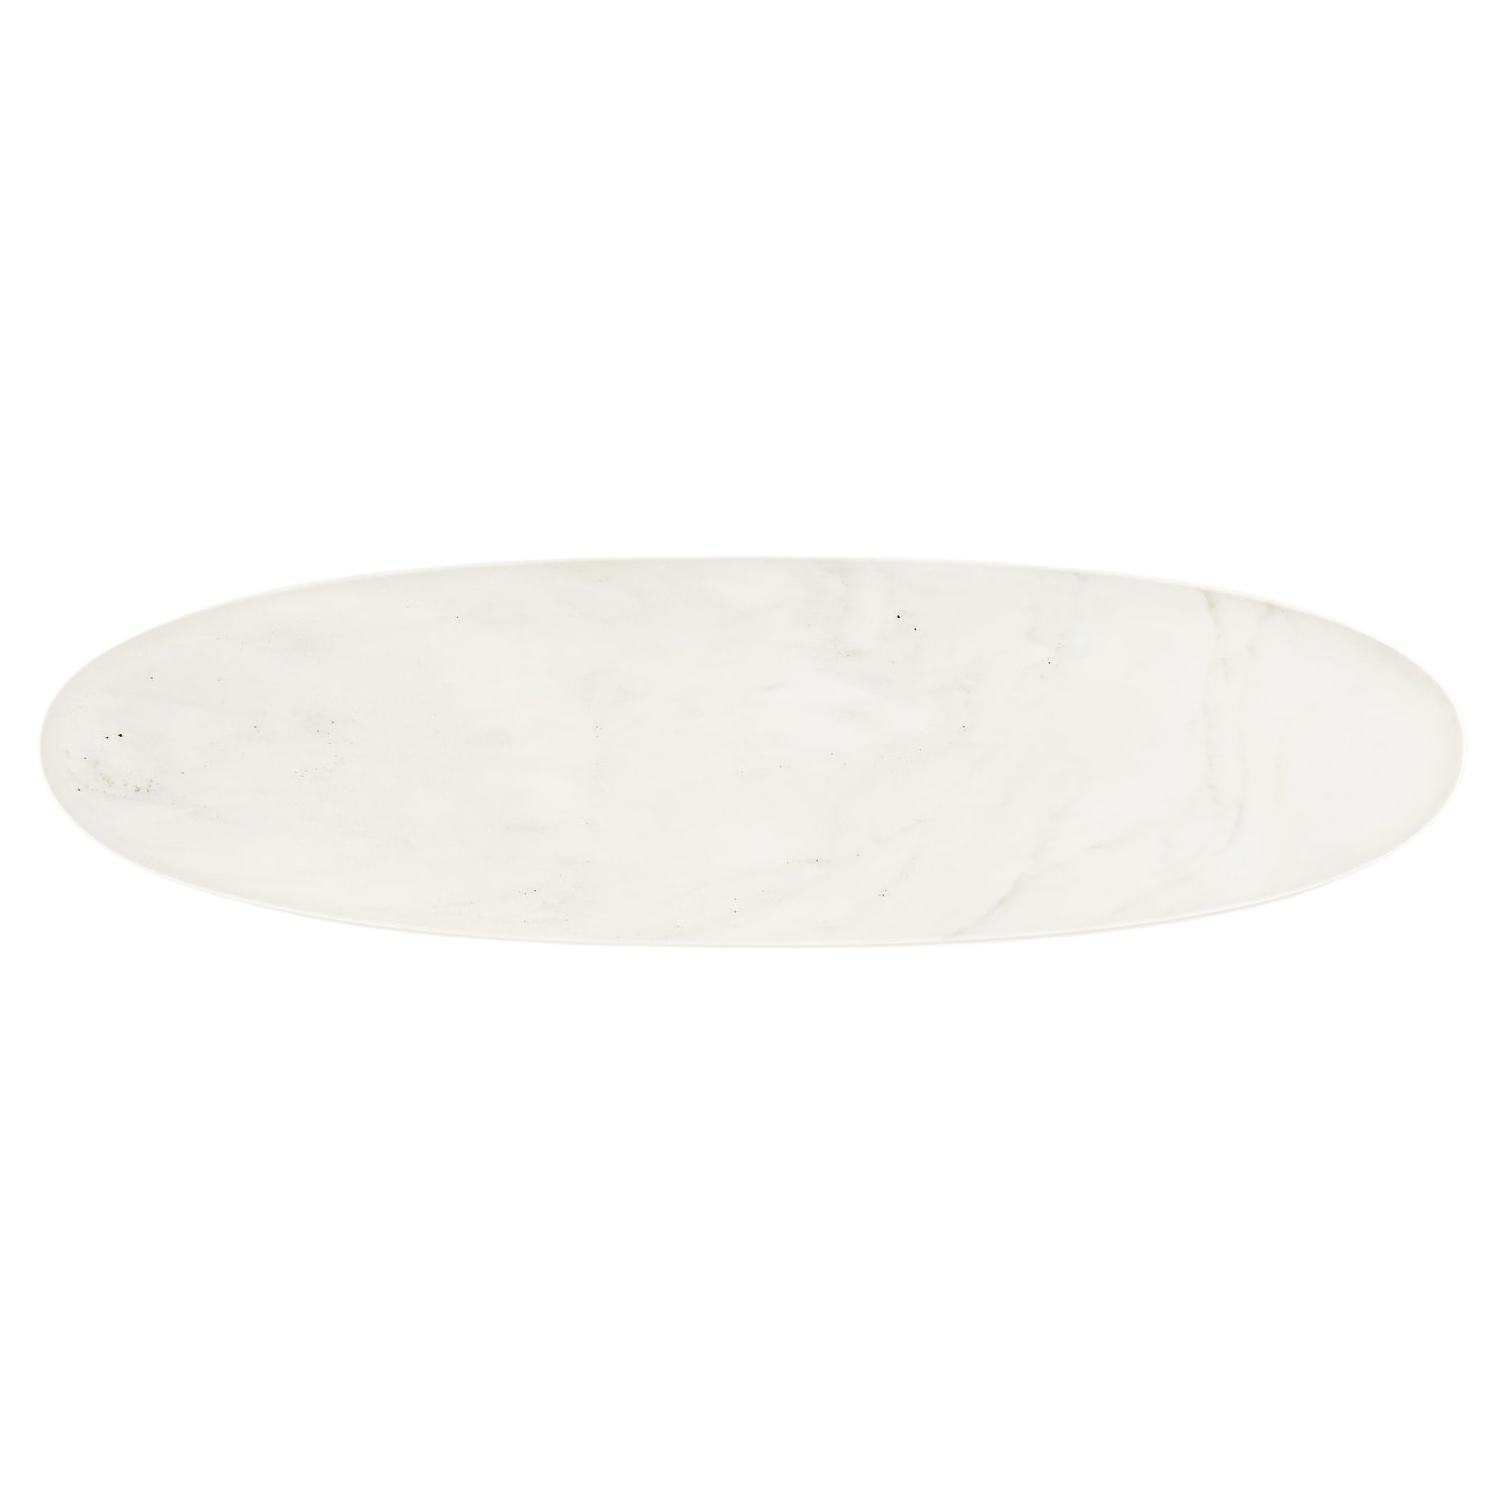 Sepia Tray by Homefolks For Sale